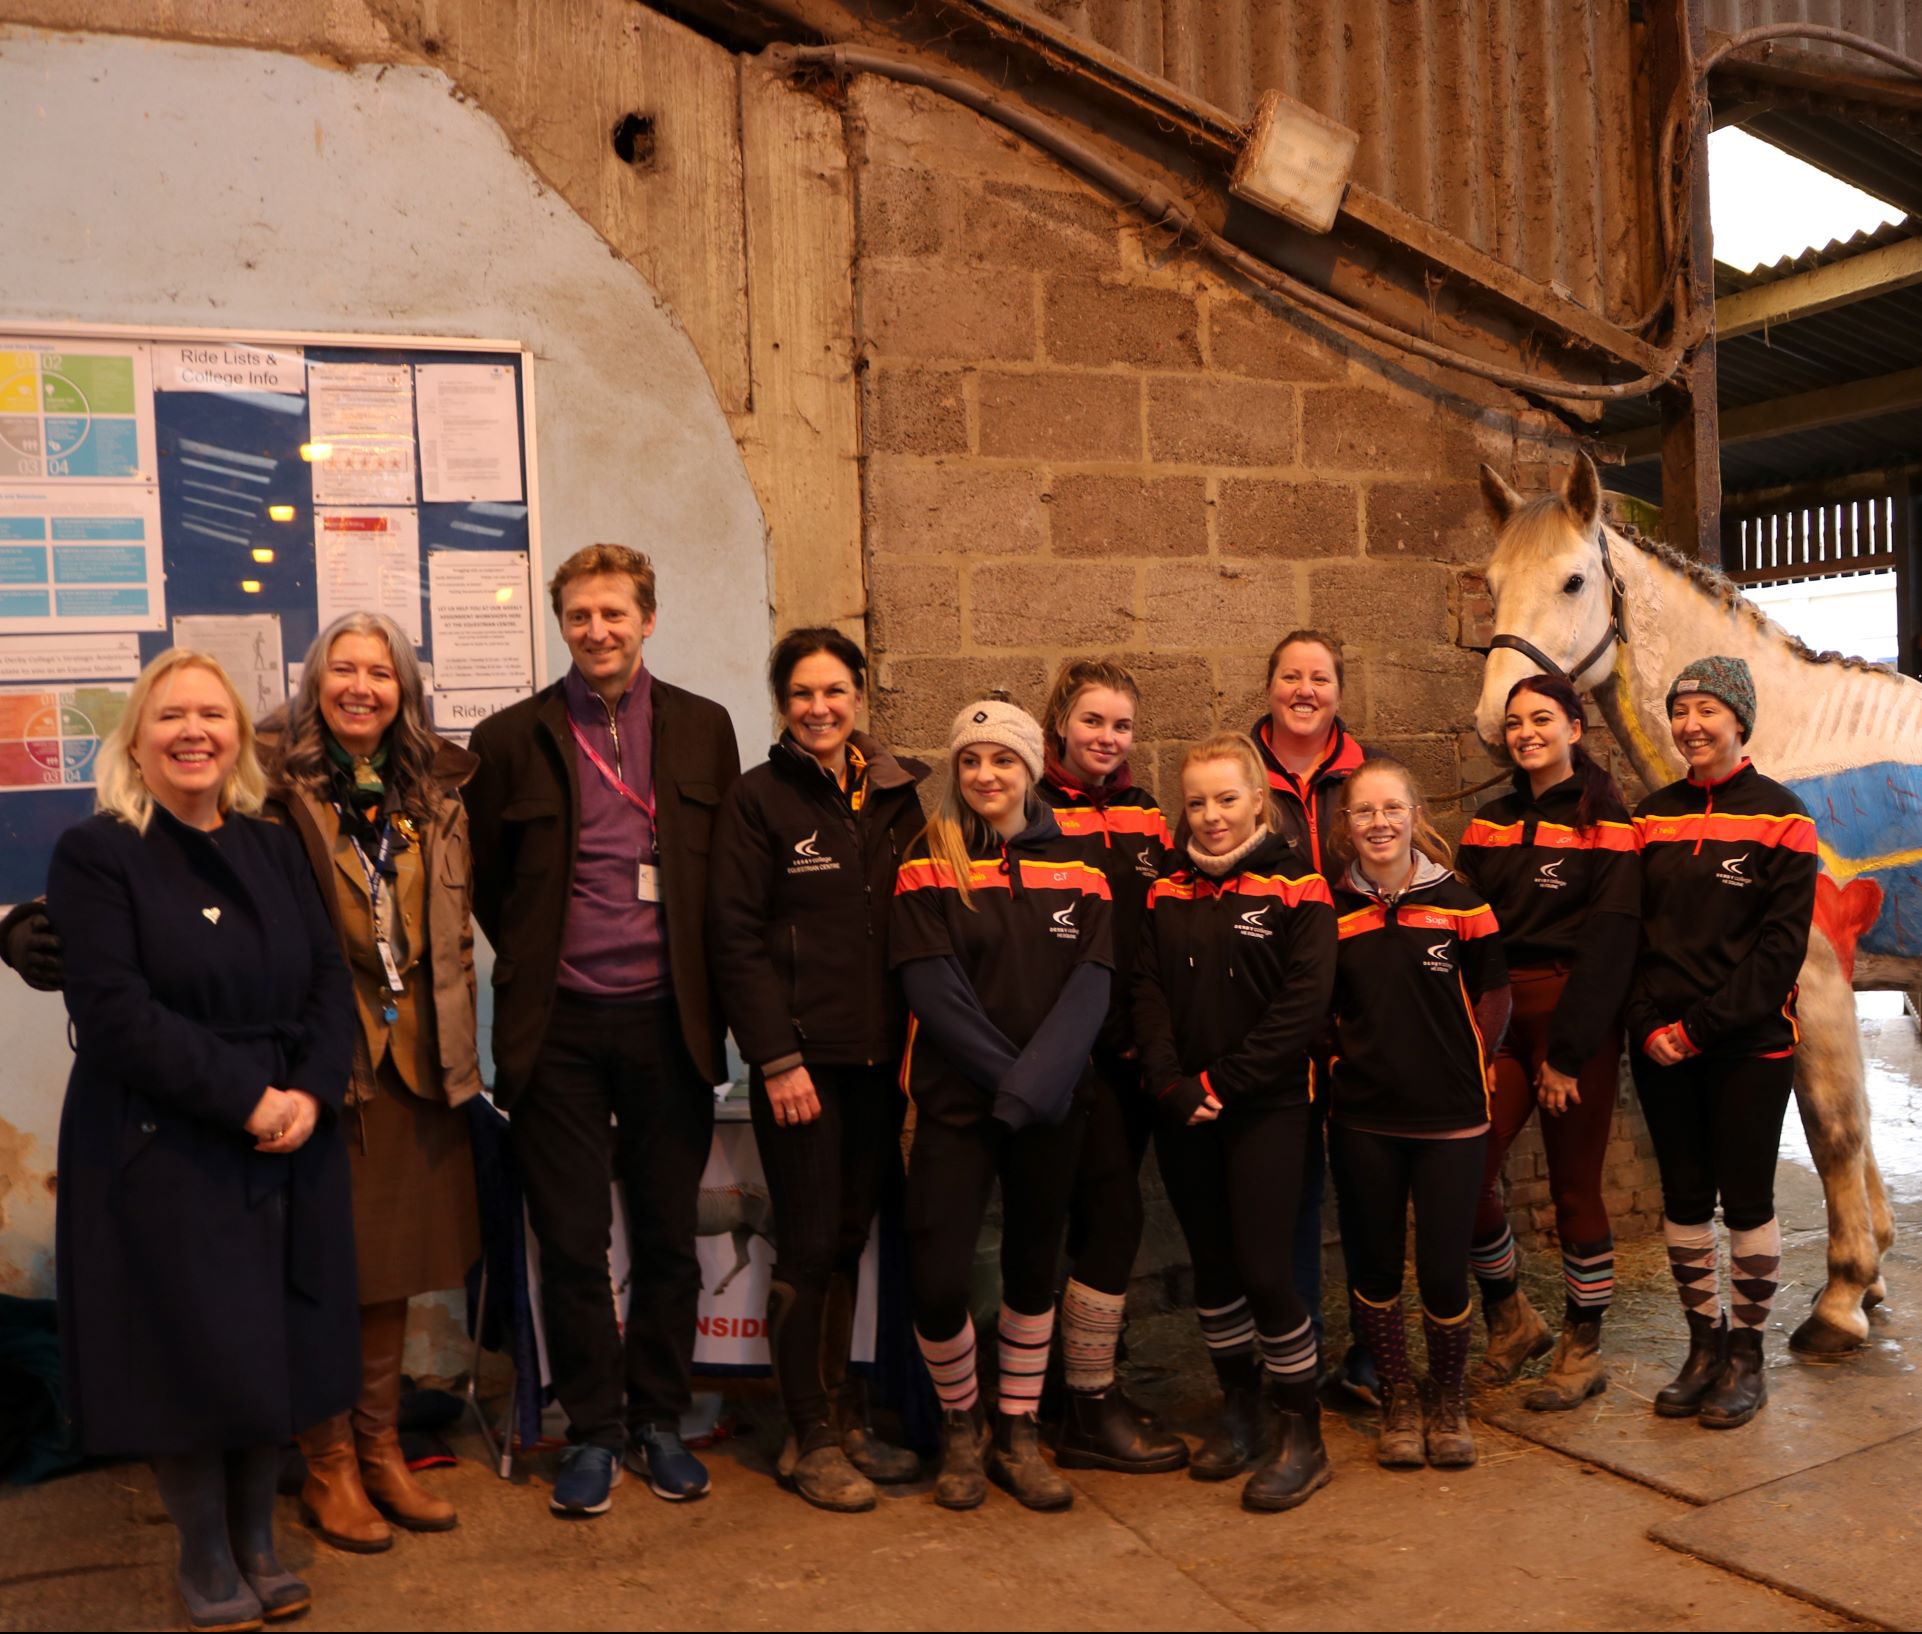 Lord Burlington with a group of Equine students and a horse